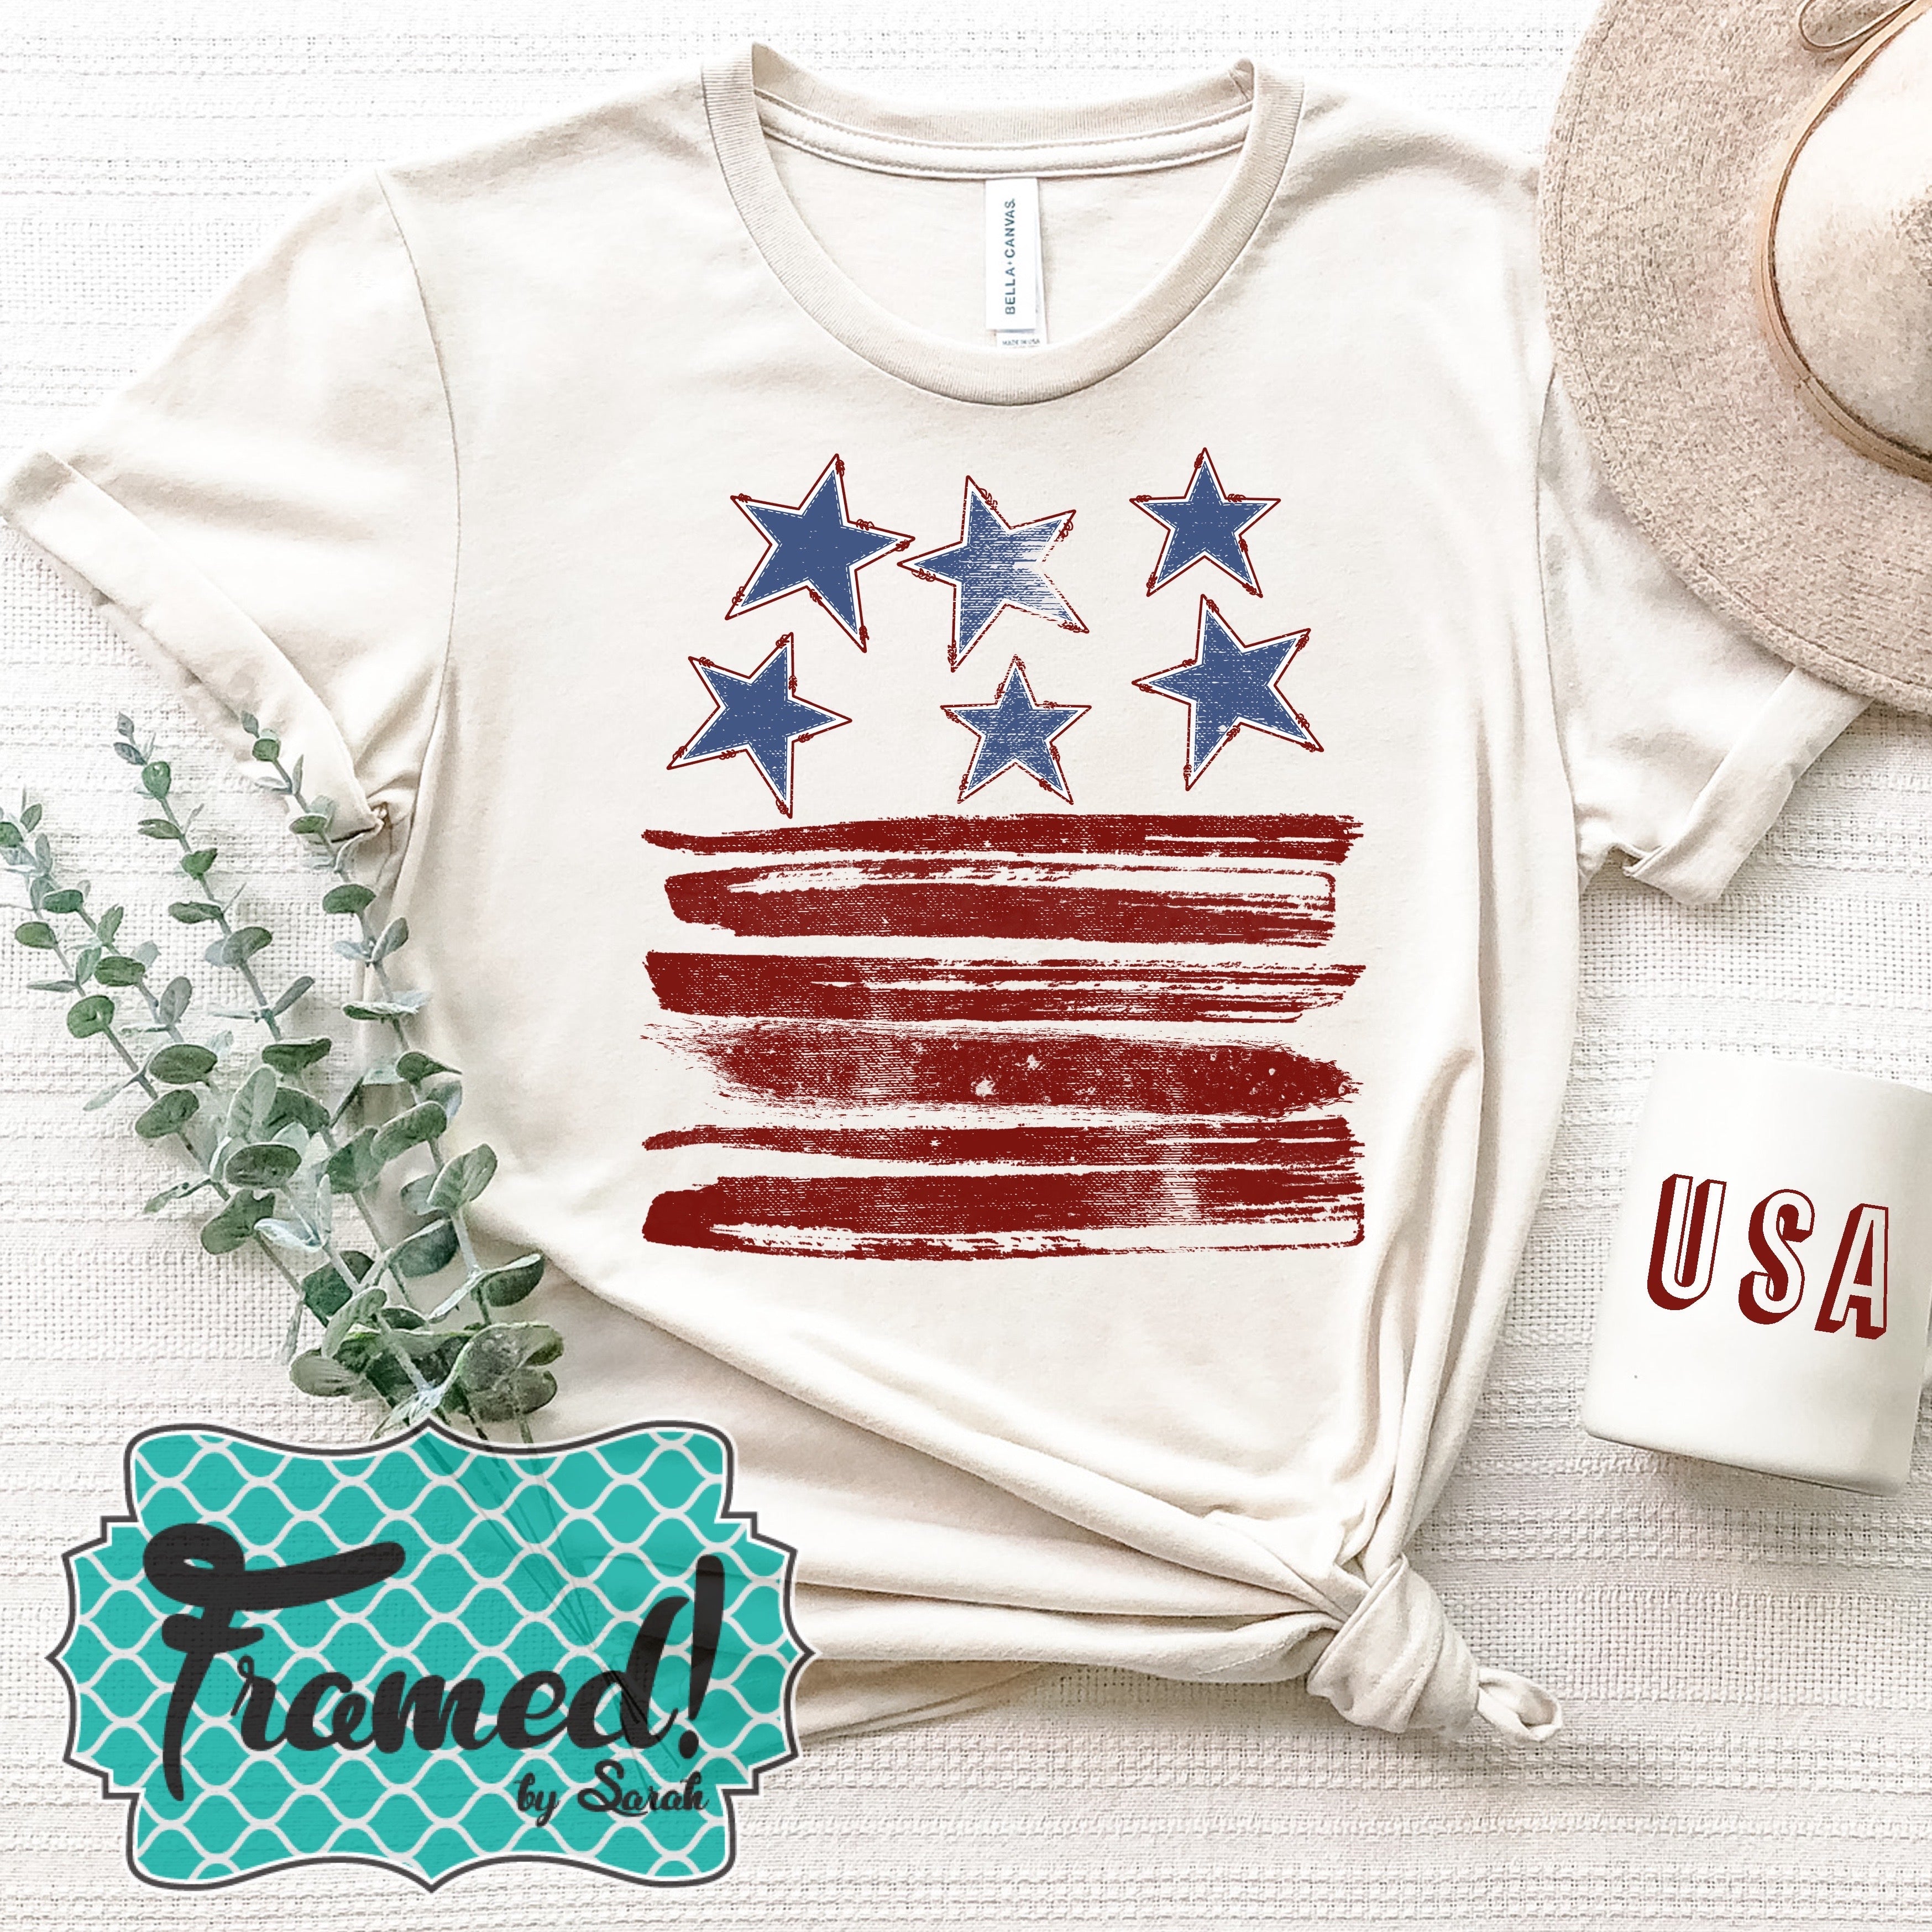 Stars & Stripes Graphic Tee (Sm, Md & 2X only)